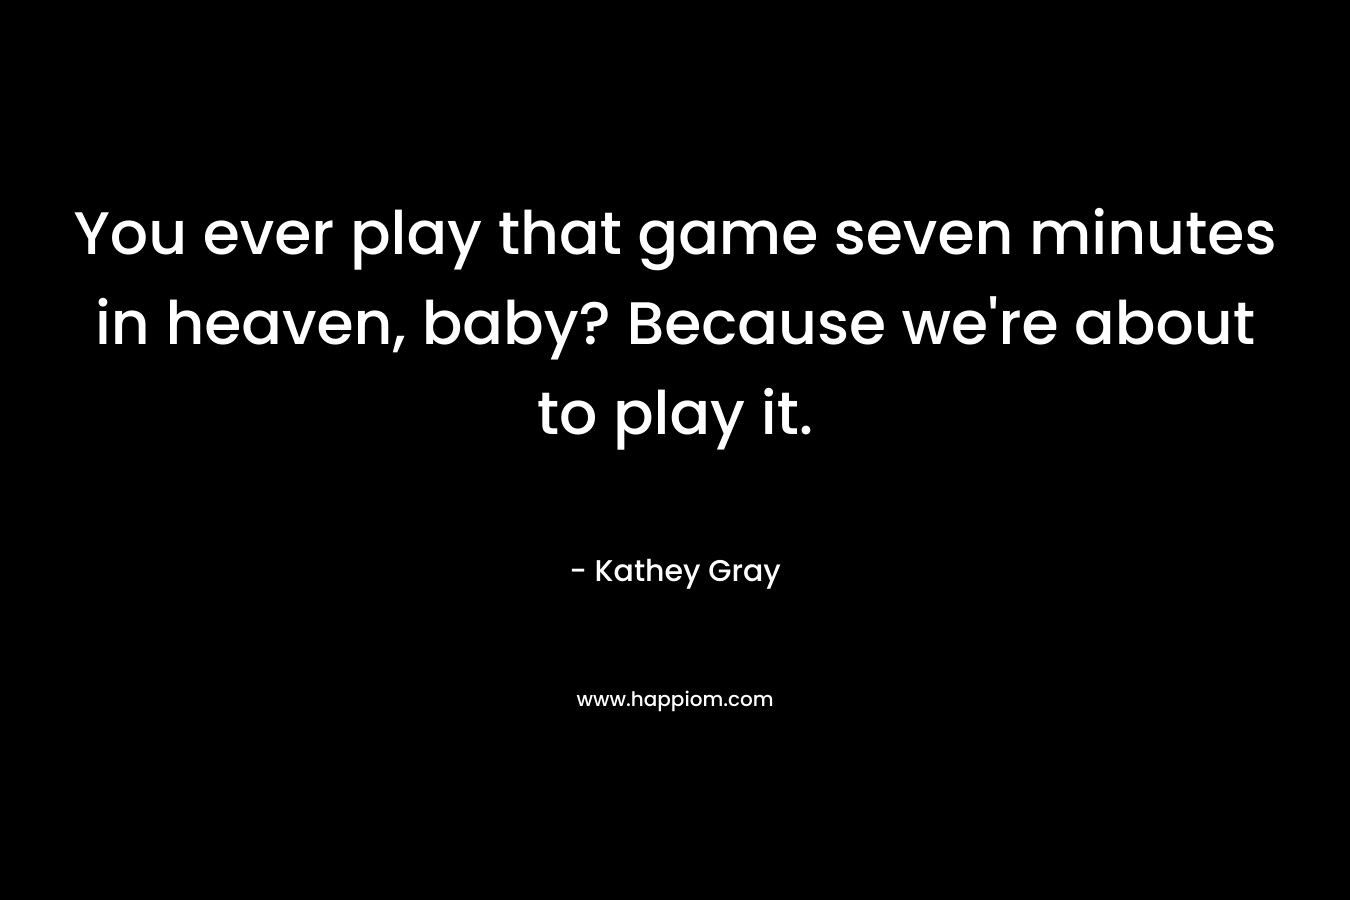 You ever play that game seven minutes in heaven, baby? Because we’re about to play it. – Kathey Gray